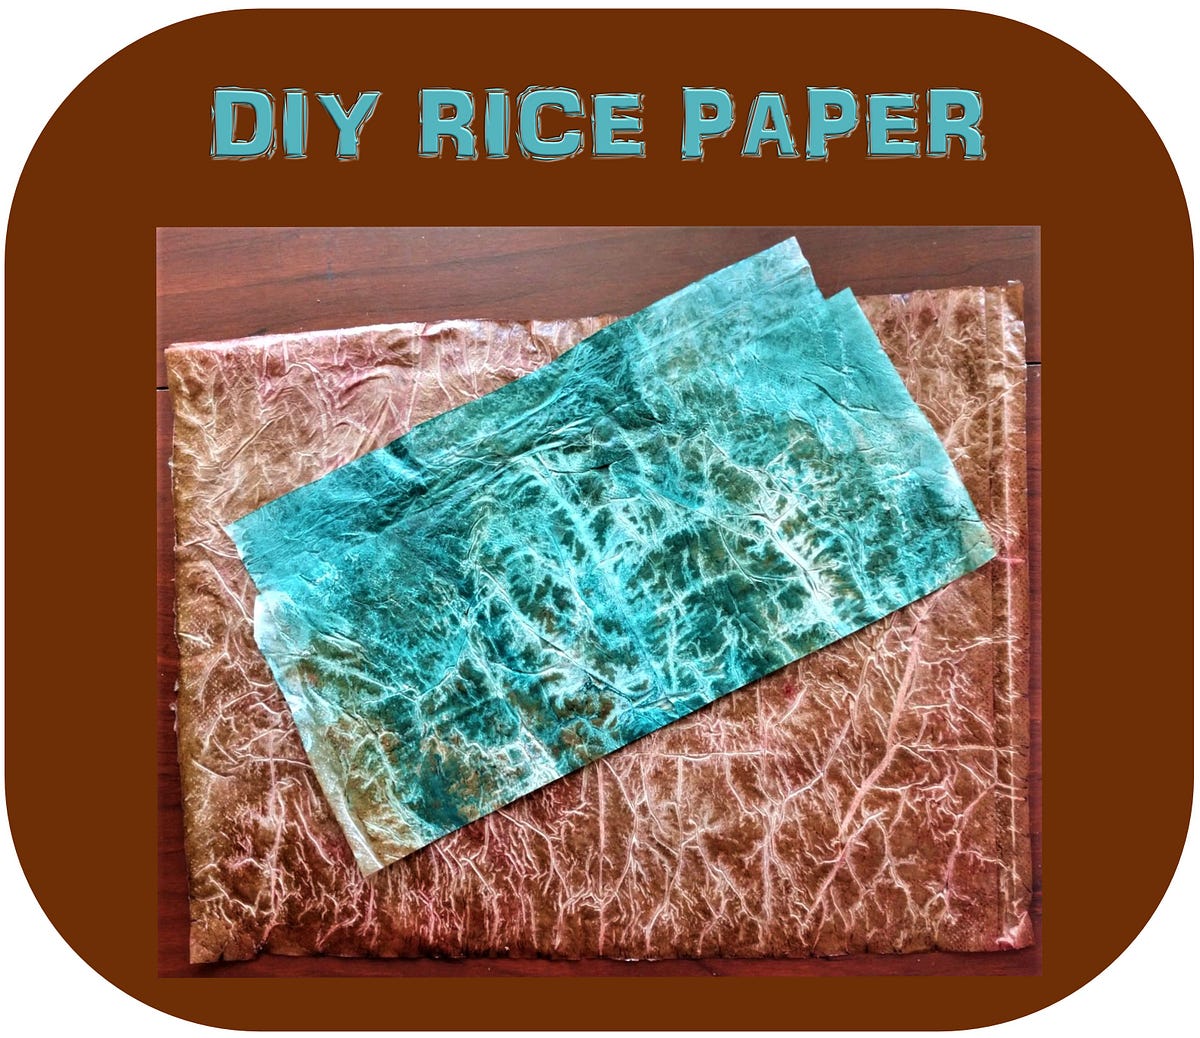 DIY Rice Paper and 7 Ways to Use It, by Celeste Wilson, The DIY Diaries